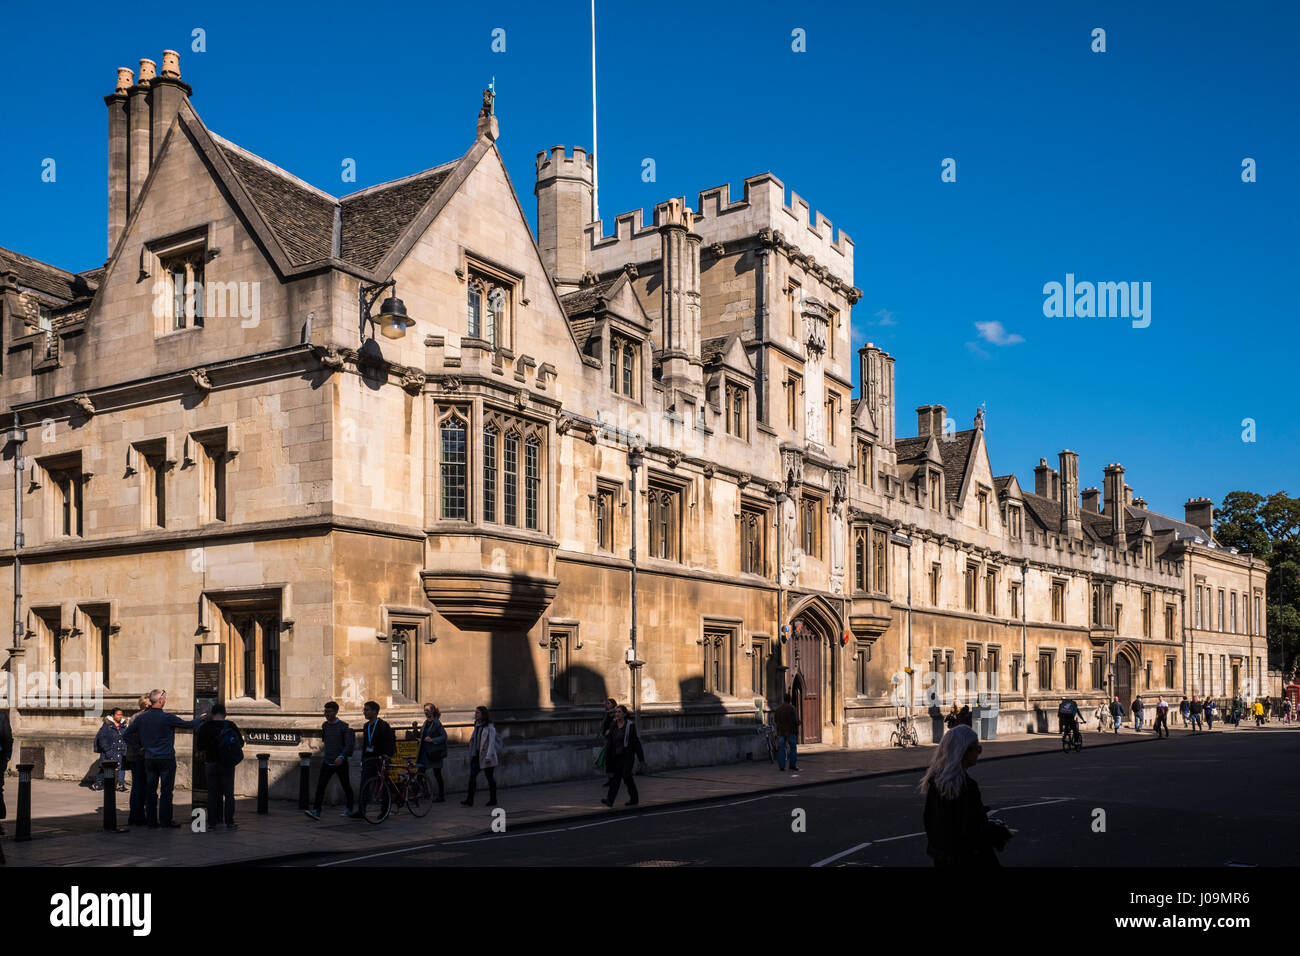 Oxford is a city known worldwide as the home of the University of Oxford, the oldest university in the English-speaking world. England, U.K. Stock Photo